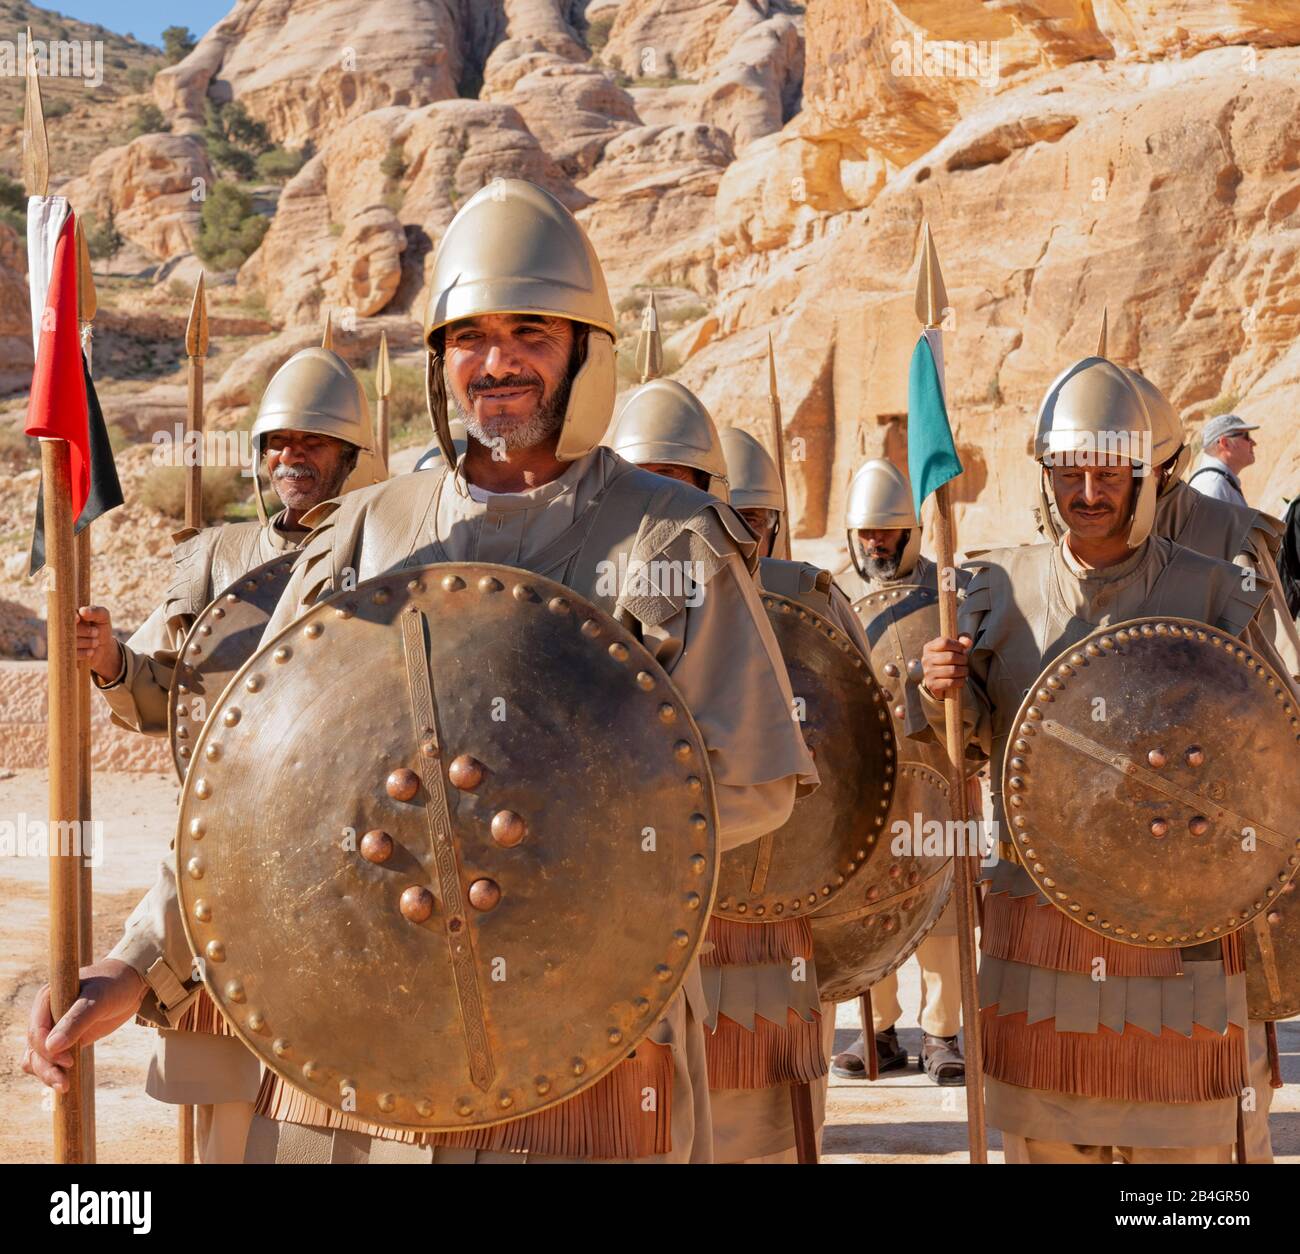 Jordan, attractions in the rock city of Petra, Roman soldiers Stock Photo